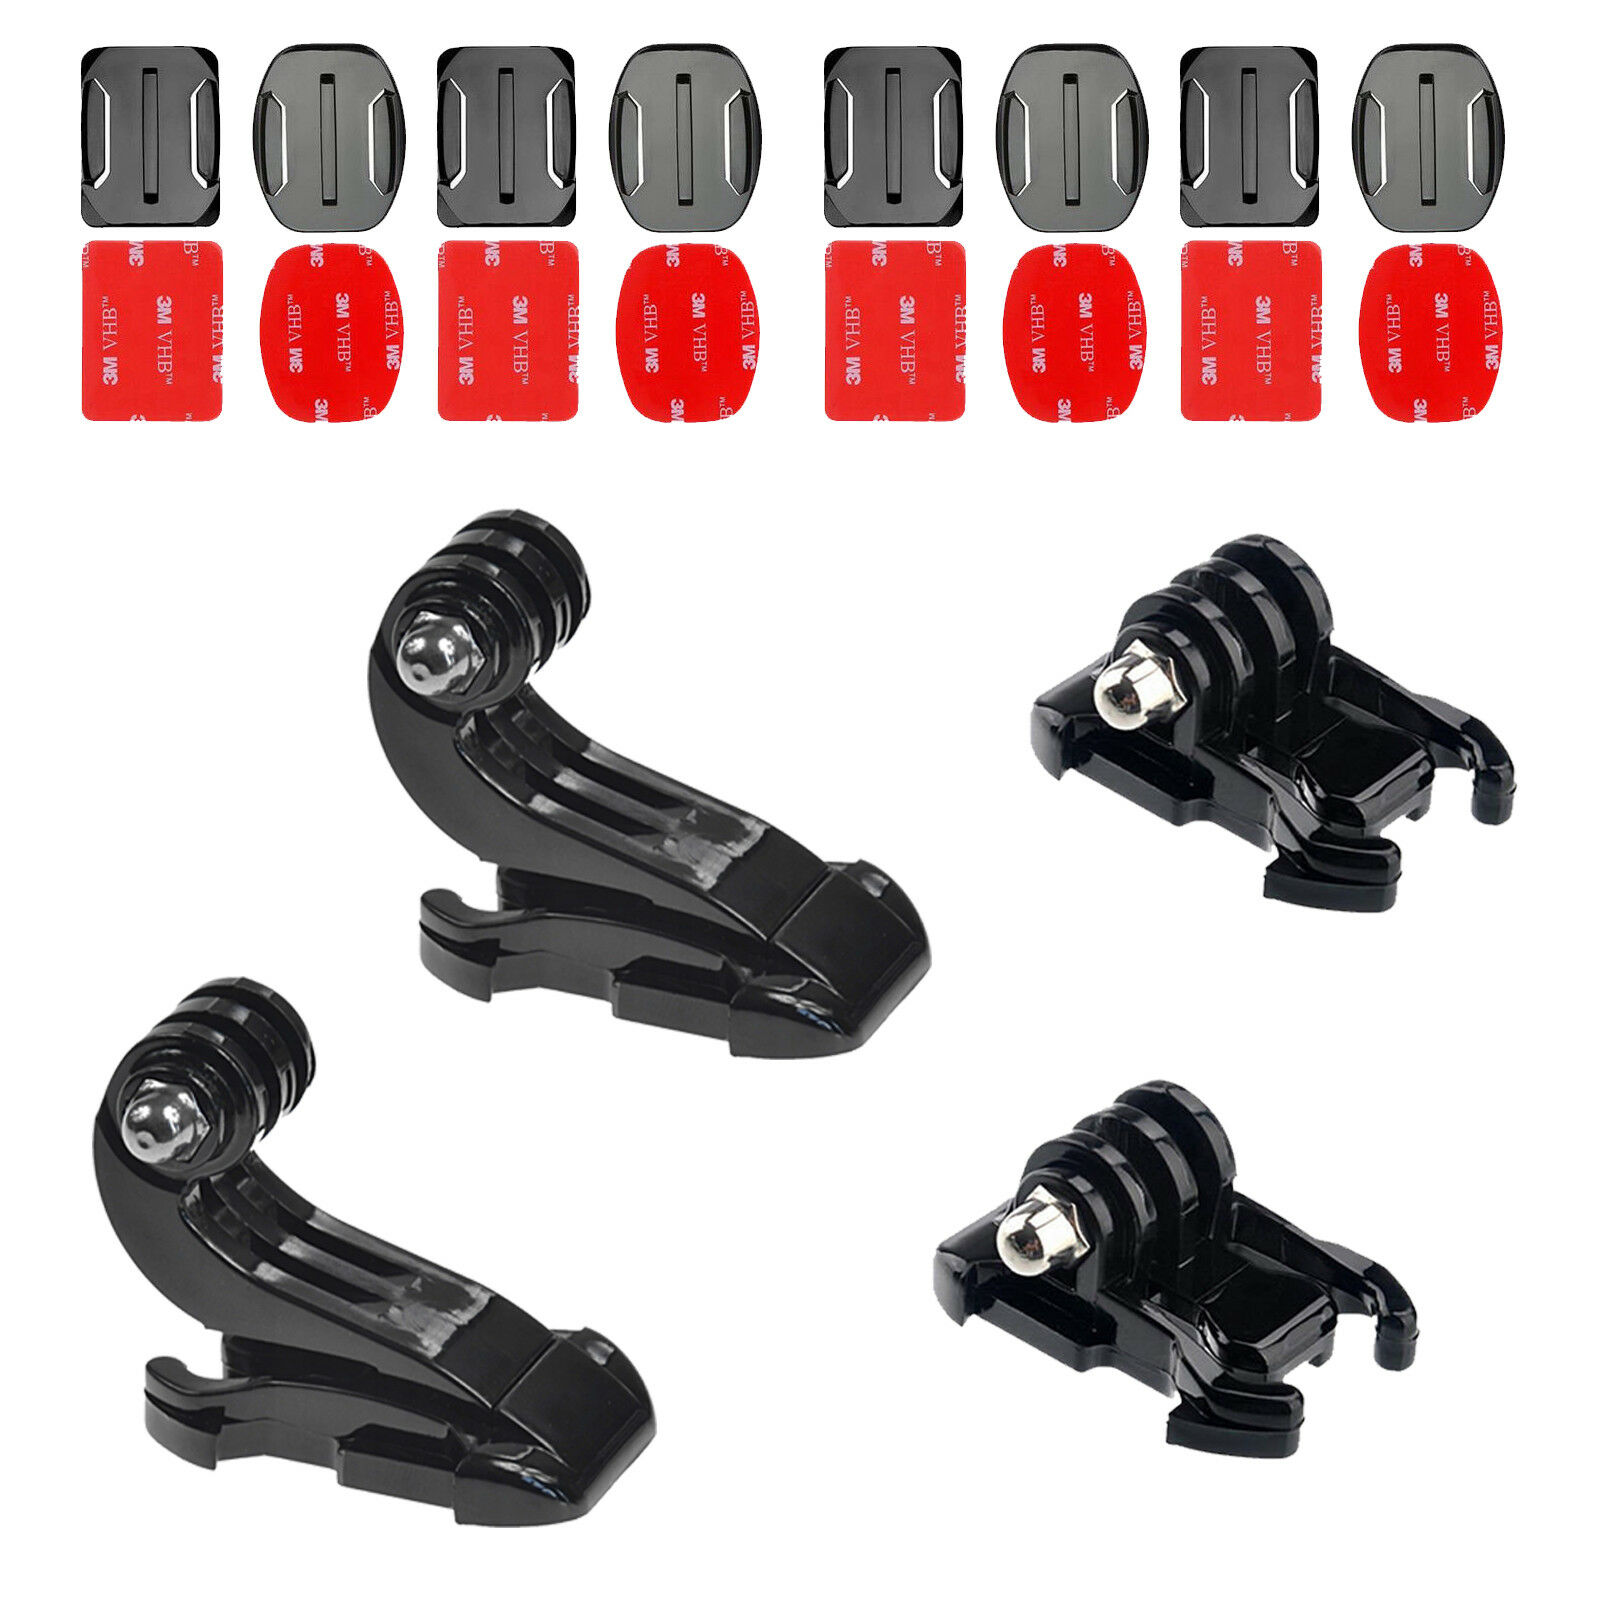 12pcs Accessories Adhesive Mount K-hook Activity Base For Gopro Hero 3 3+ 4 5 6